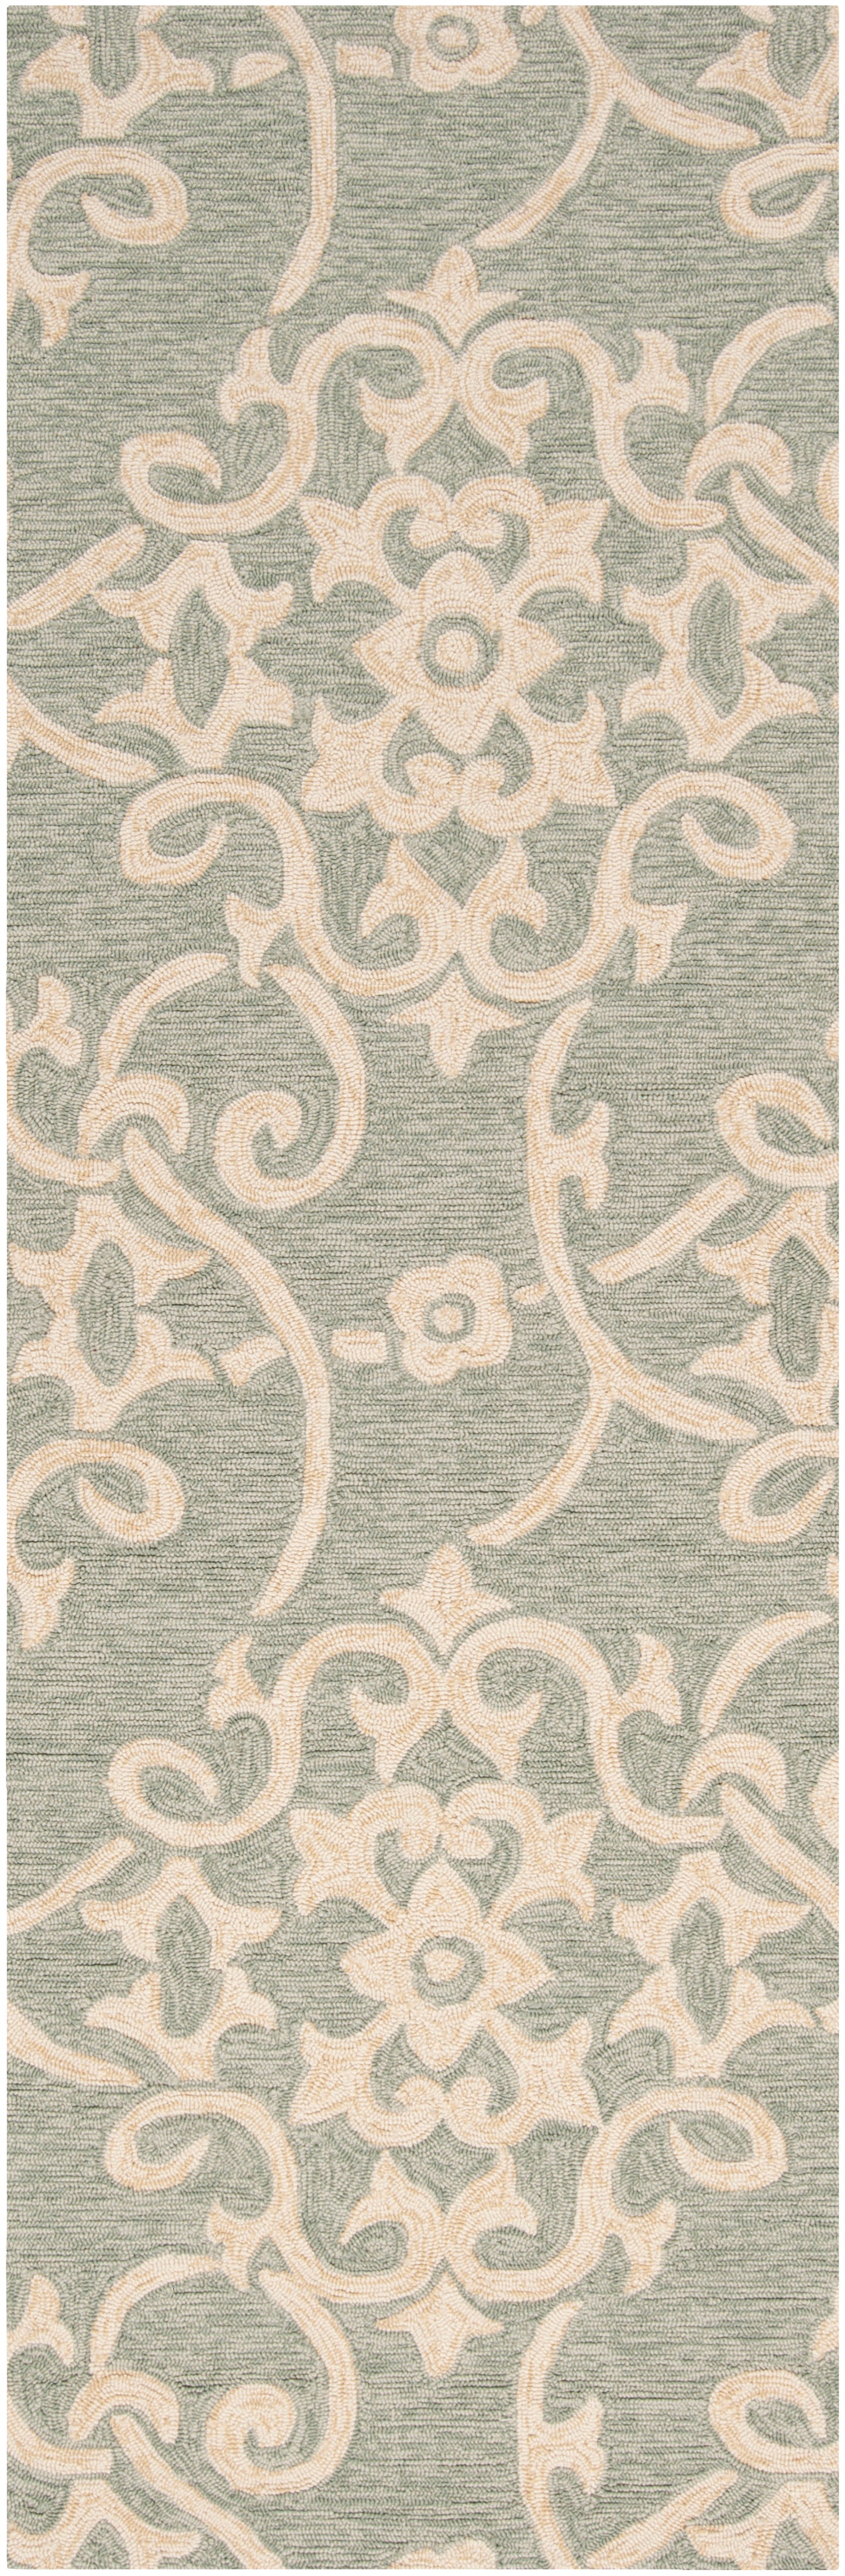 Rain 562 Hand Hooked Synthetic Blend Indoor/Outdoor Area Rug by Surya Rugs